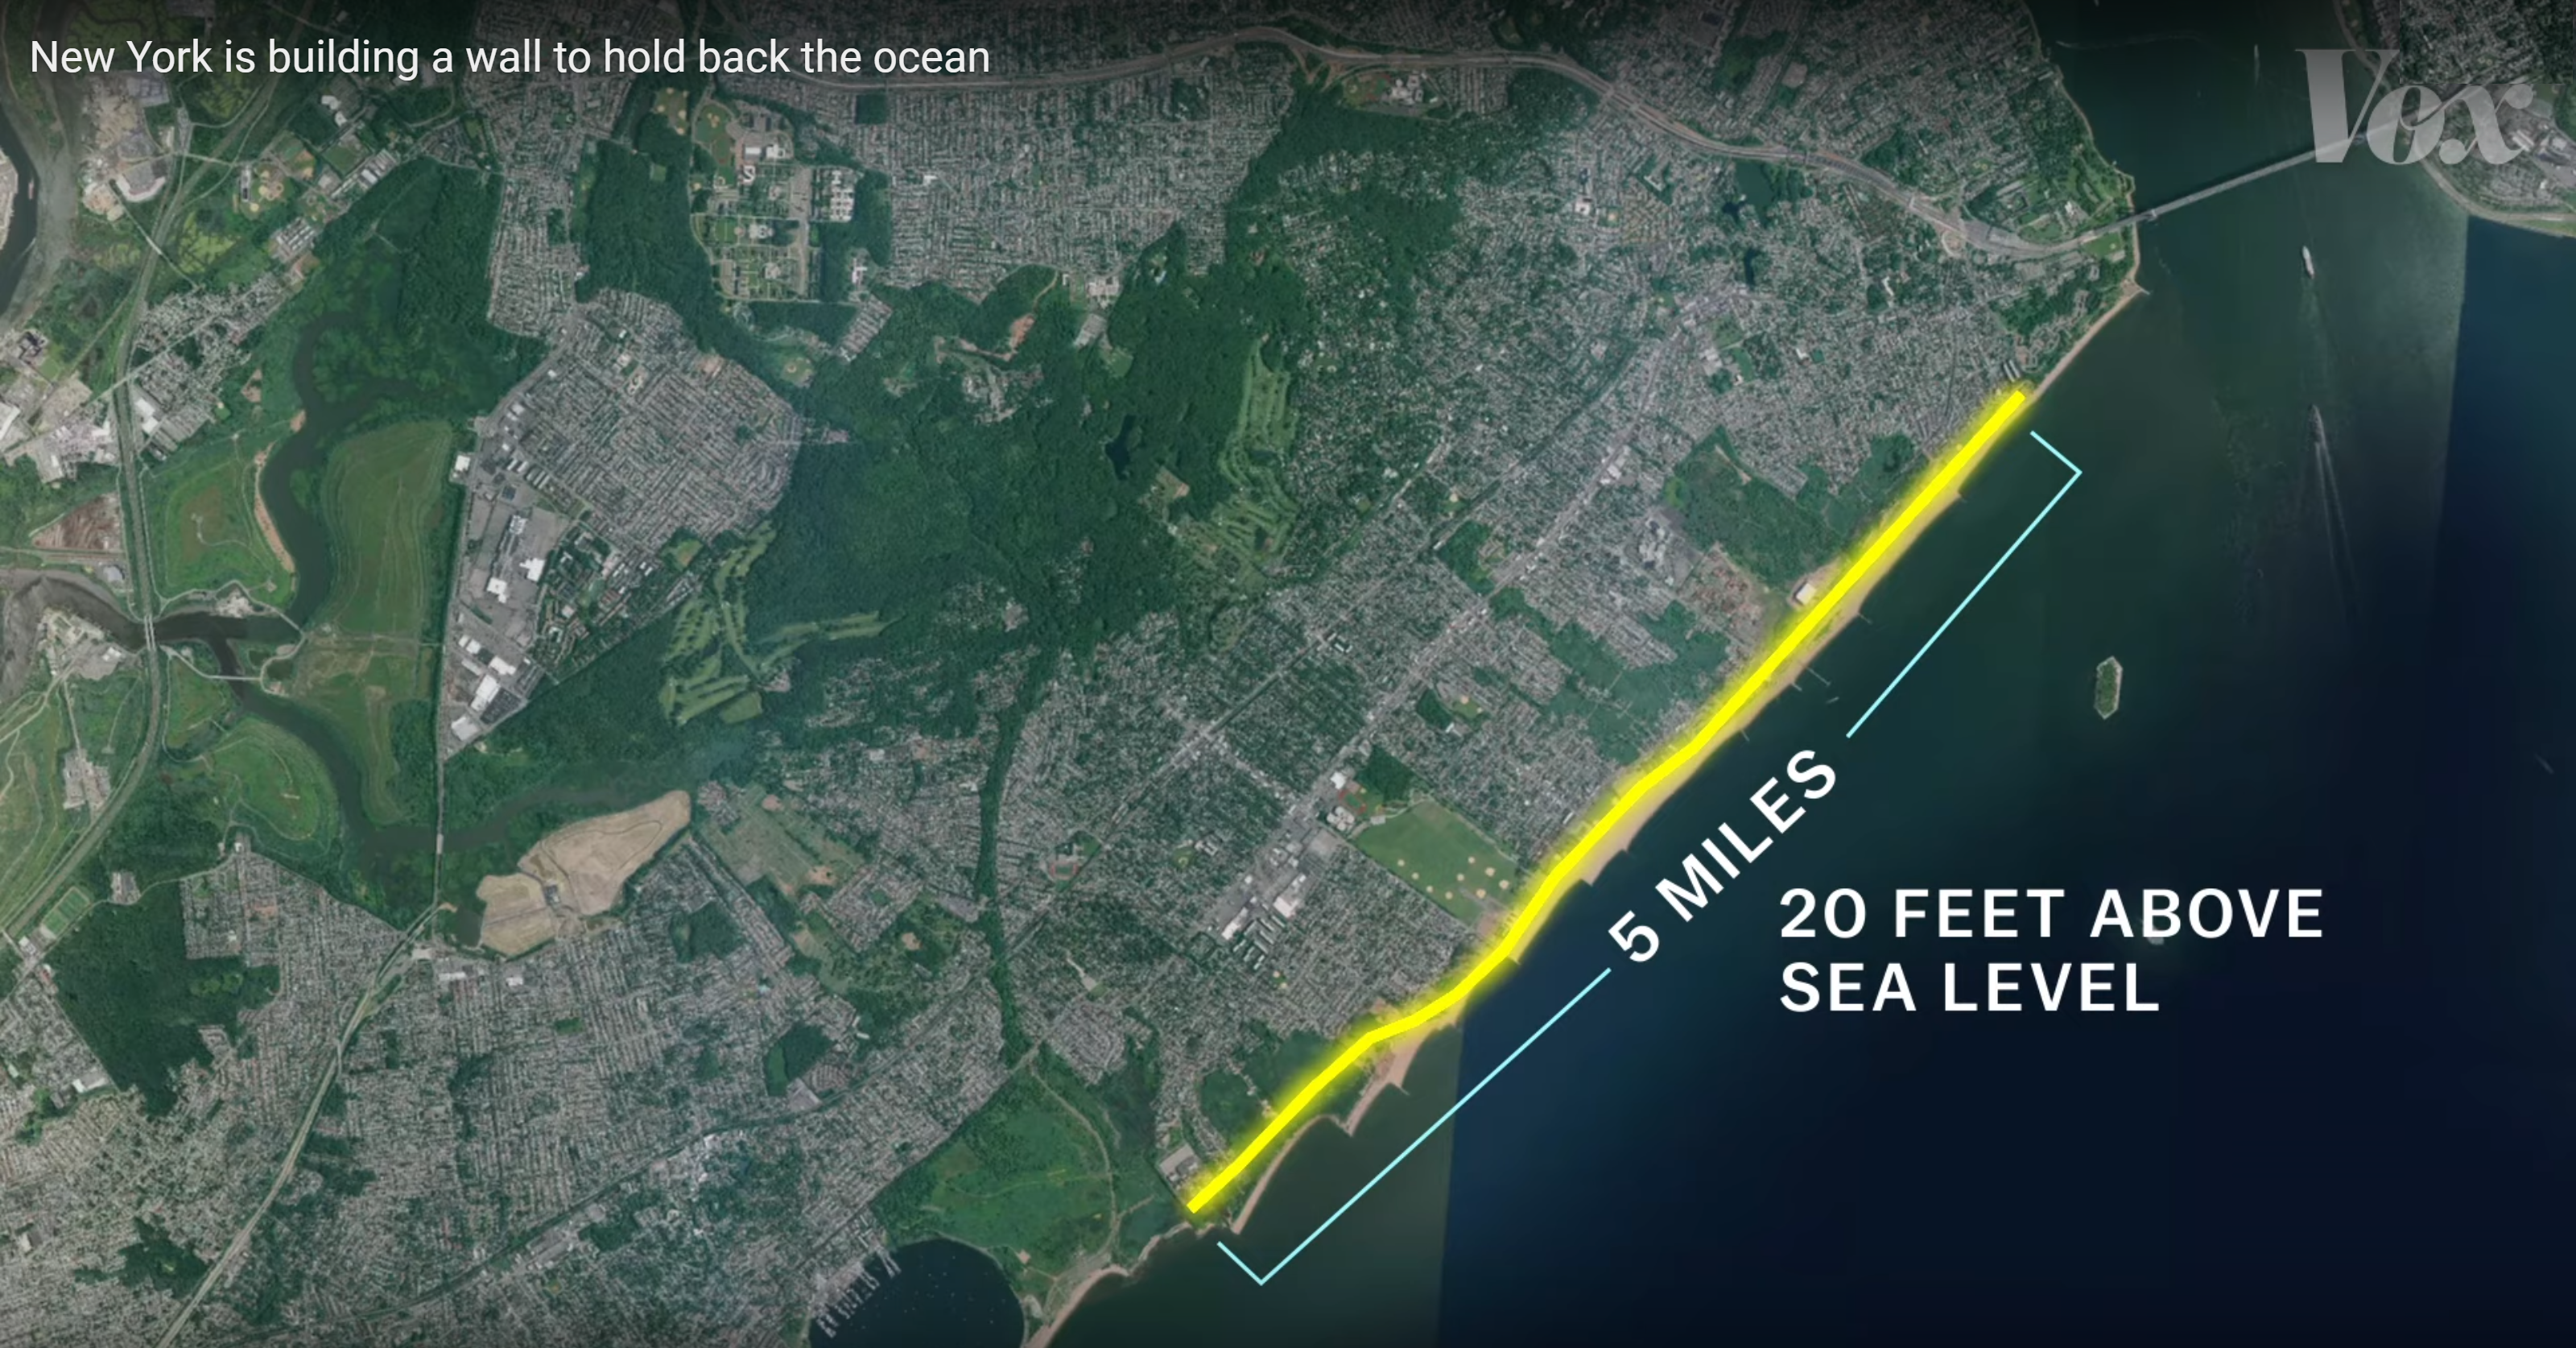 Aerial view of Staten Island with proposed sea wall indicated. Graphic: Vox.png